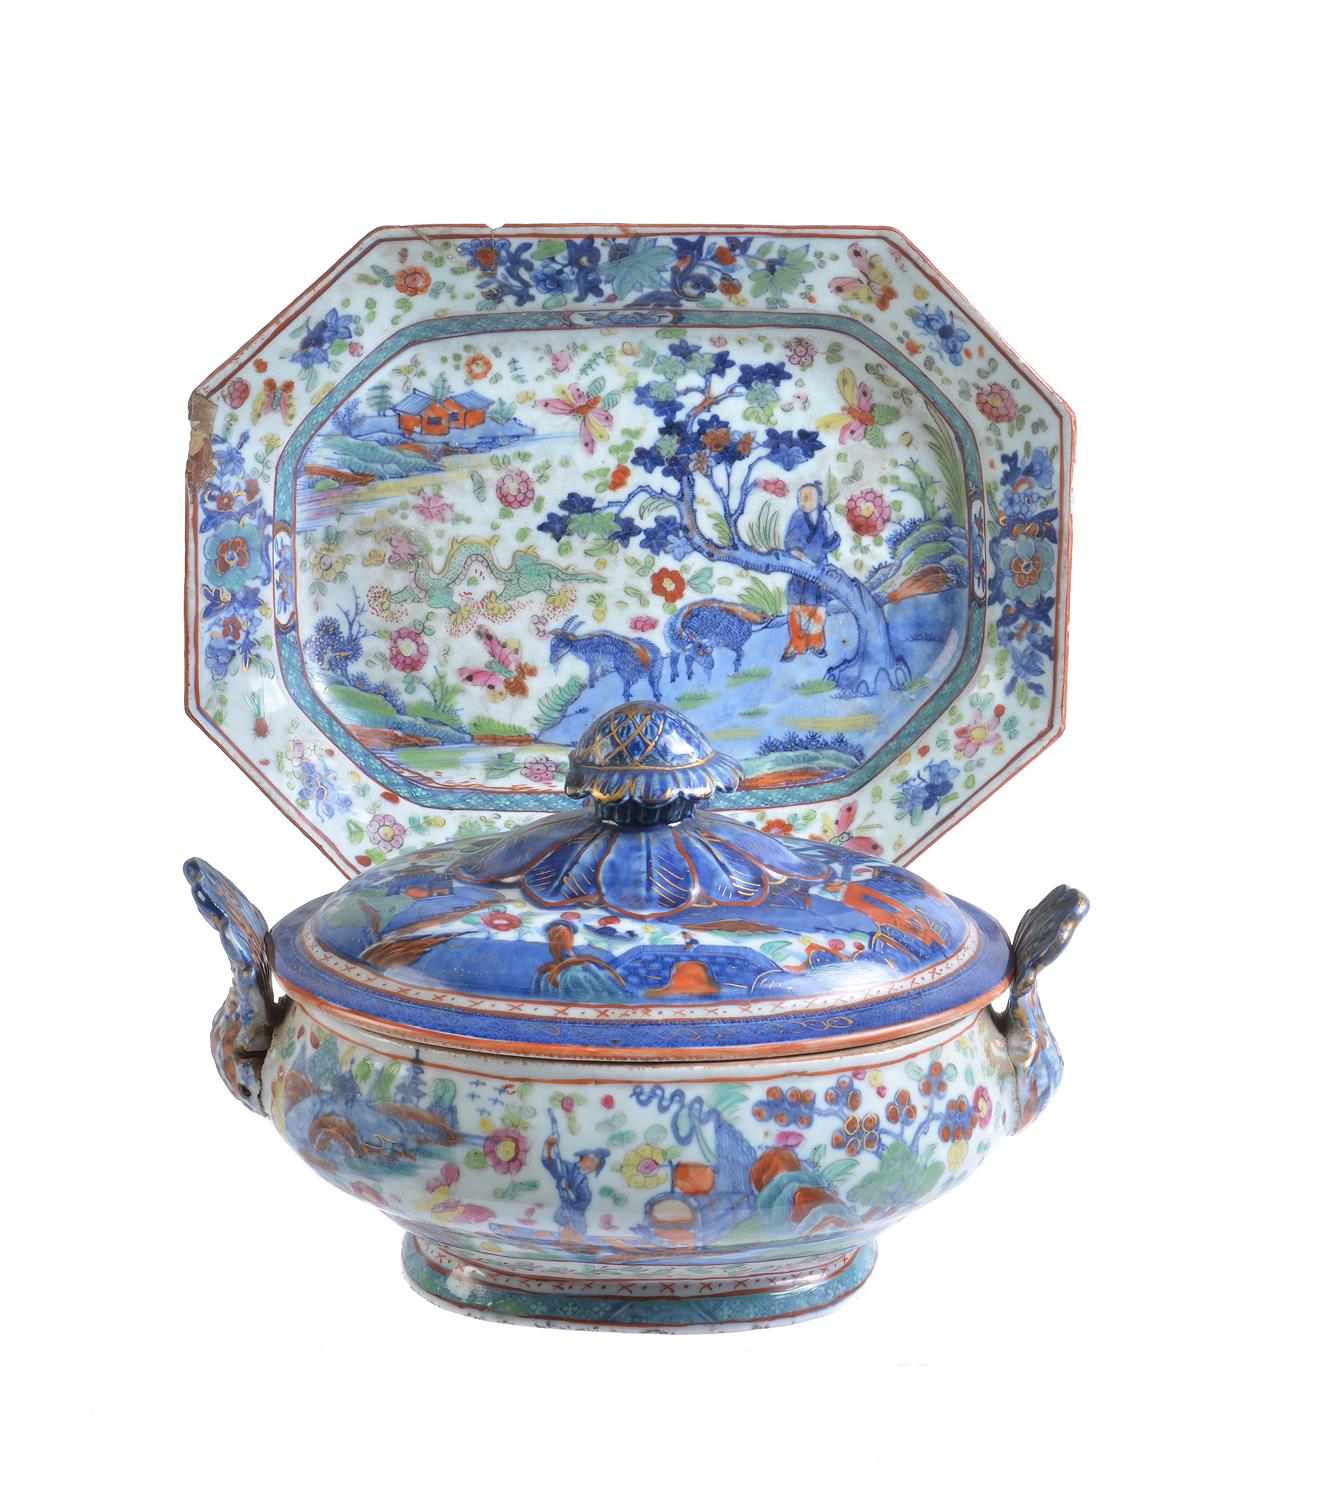 A Chinese 'clobbered' tureen and unmatched cover